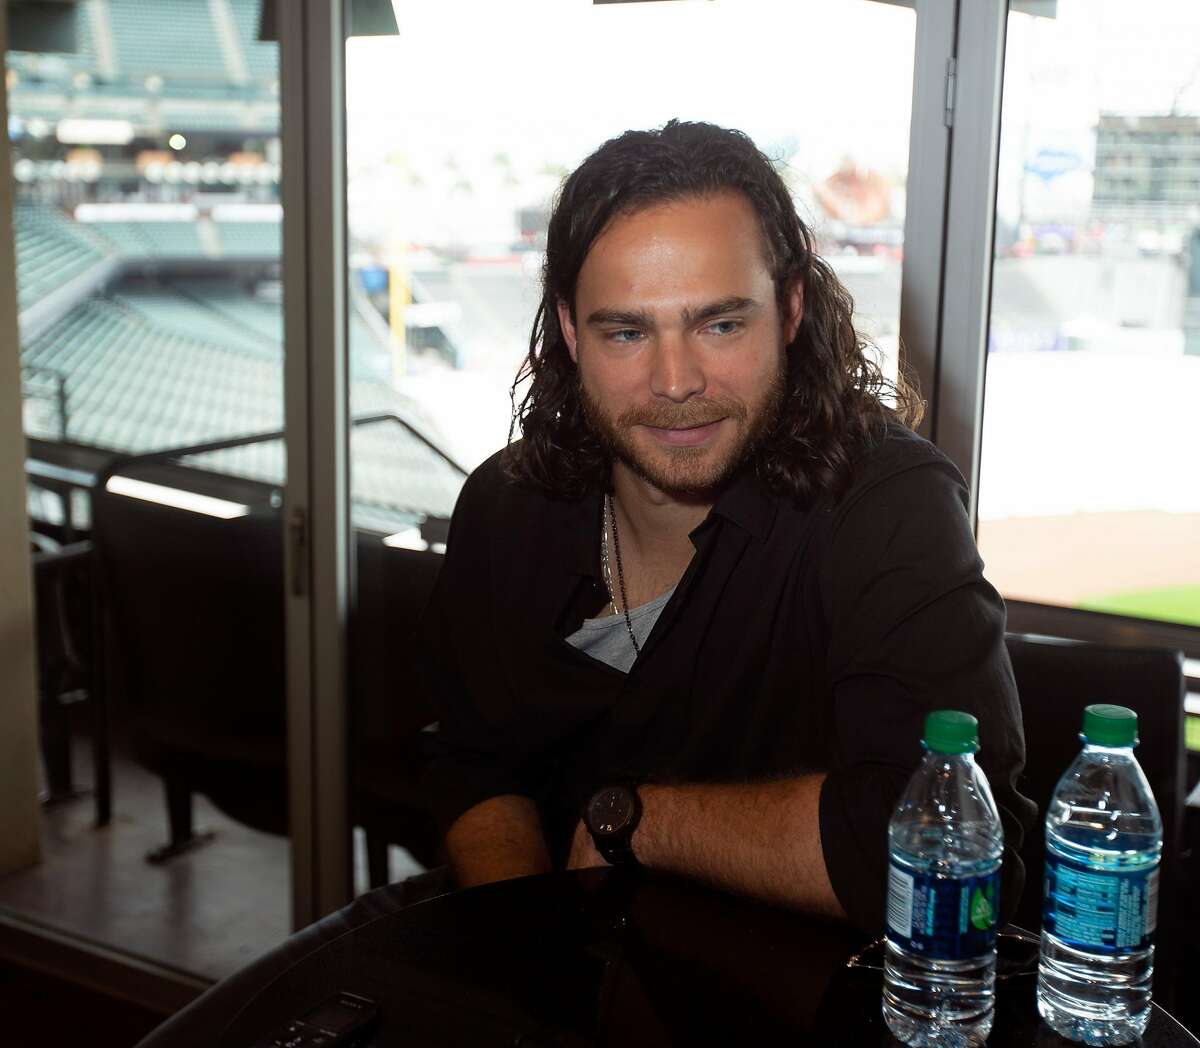 Shortstop Brandon Crawford talks to reporters at the San Francisco Giants media day, on Friday, Feb. 8, 2019 in San Francisco, Calif.